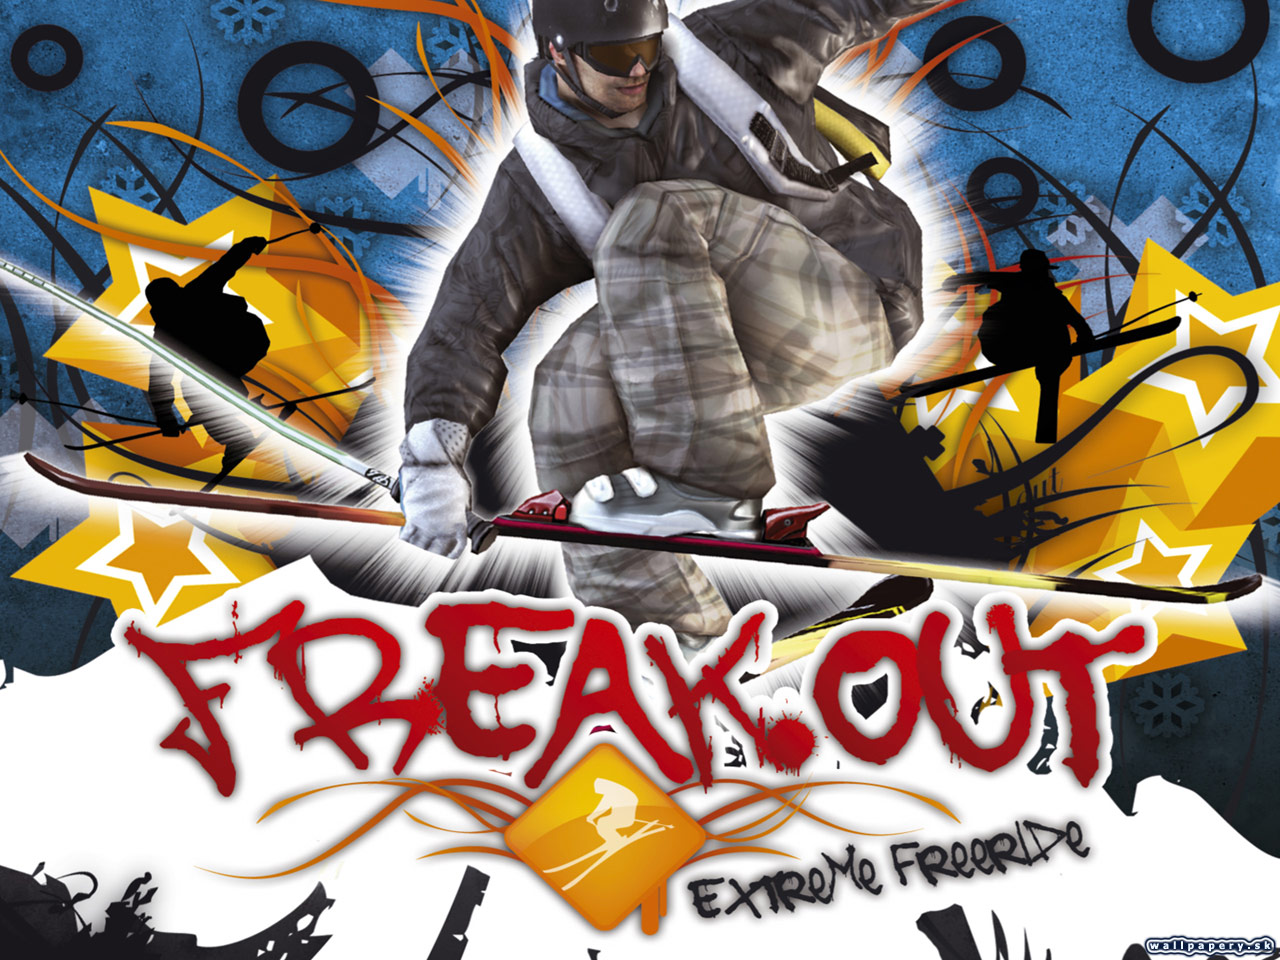 Freak Out: Extreme Freeride - wallpaper 2